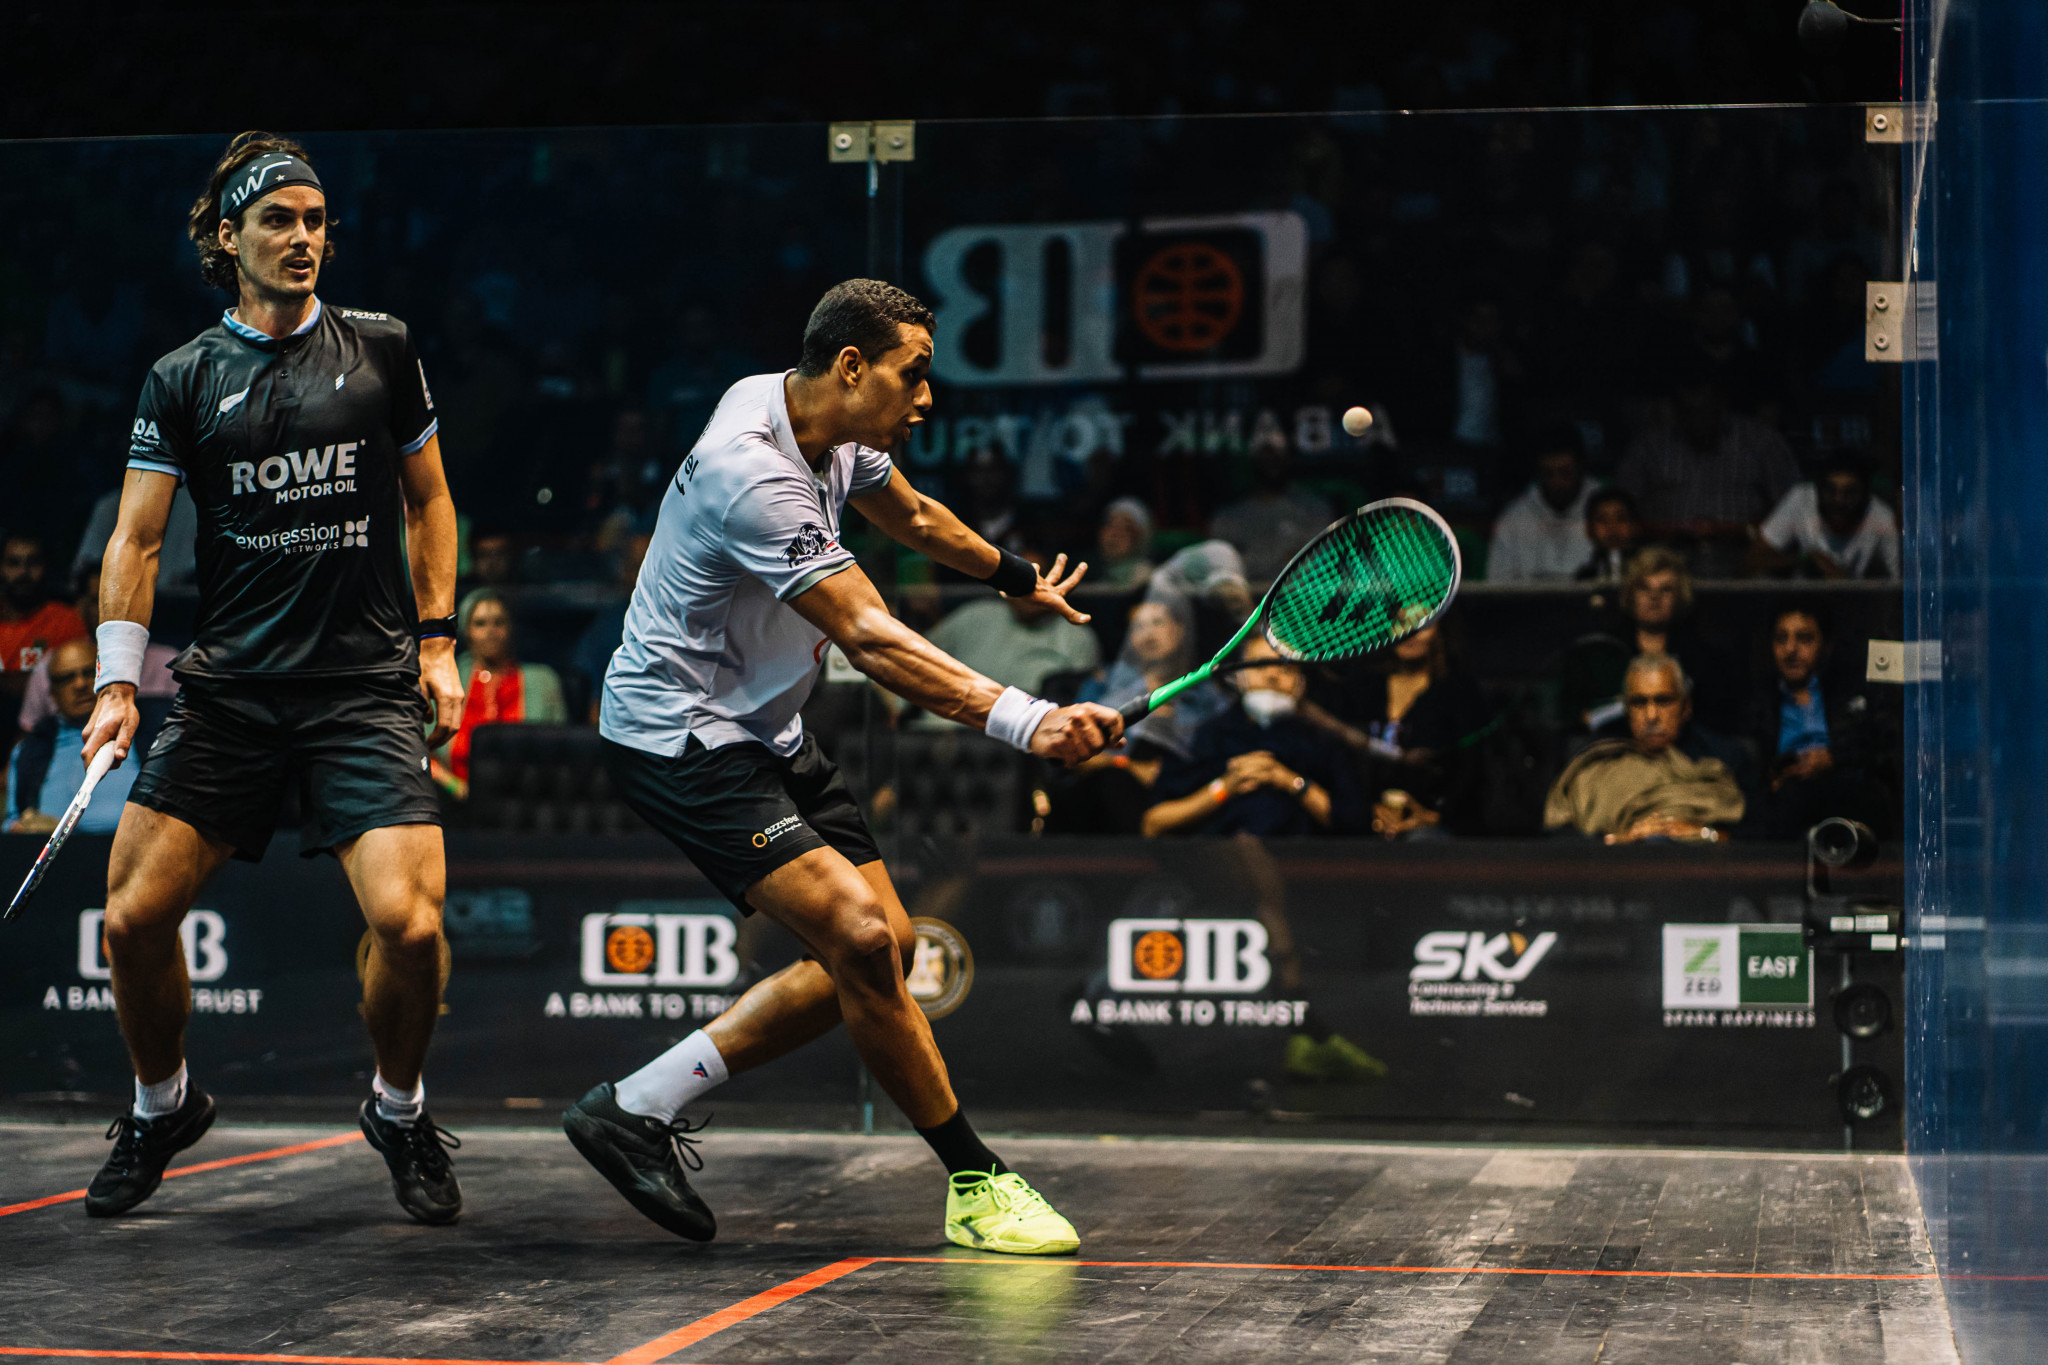 Paul Coll and Mostafa Asal could meet again at the Black Ball Squash Open after their battle at the Egyptian Open last month ©PSA